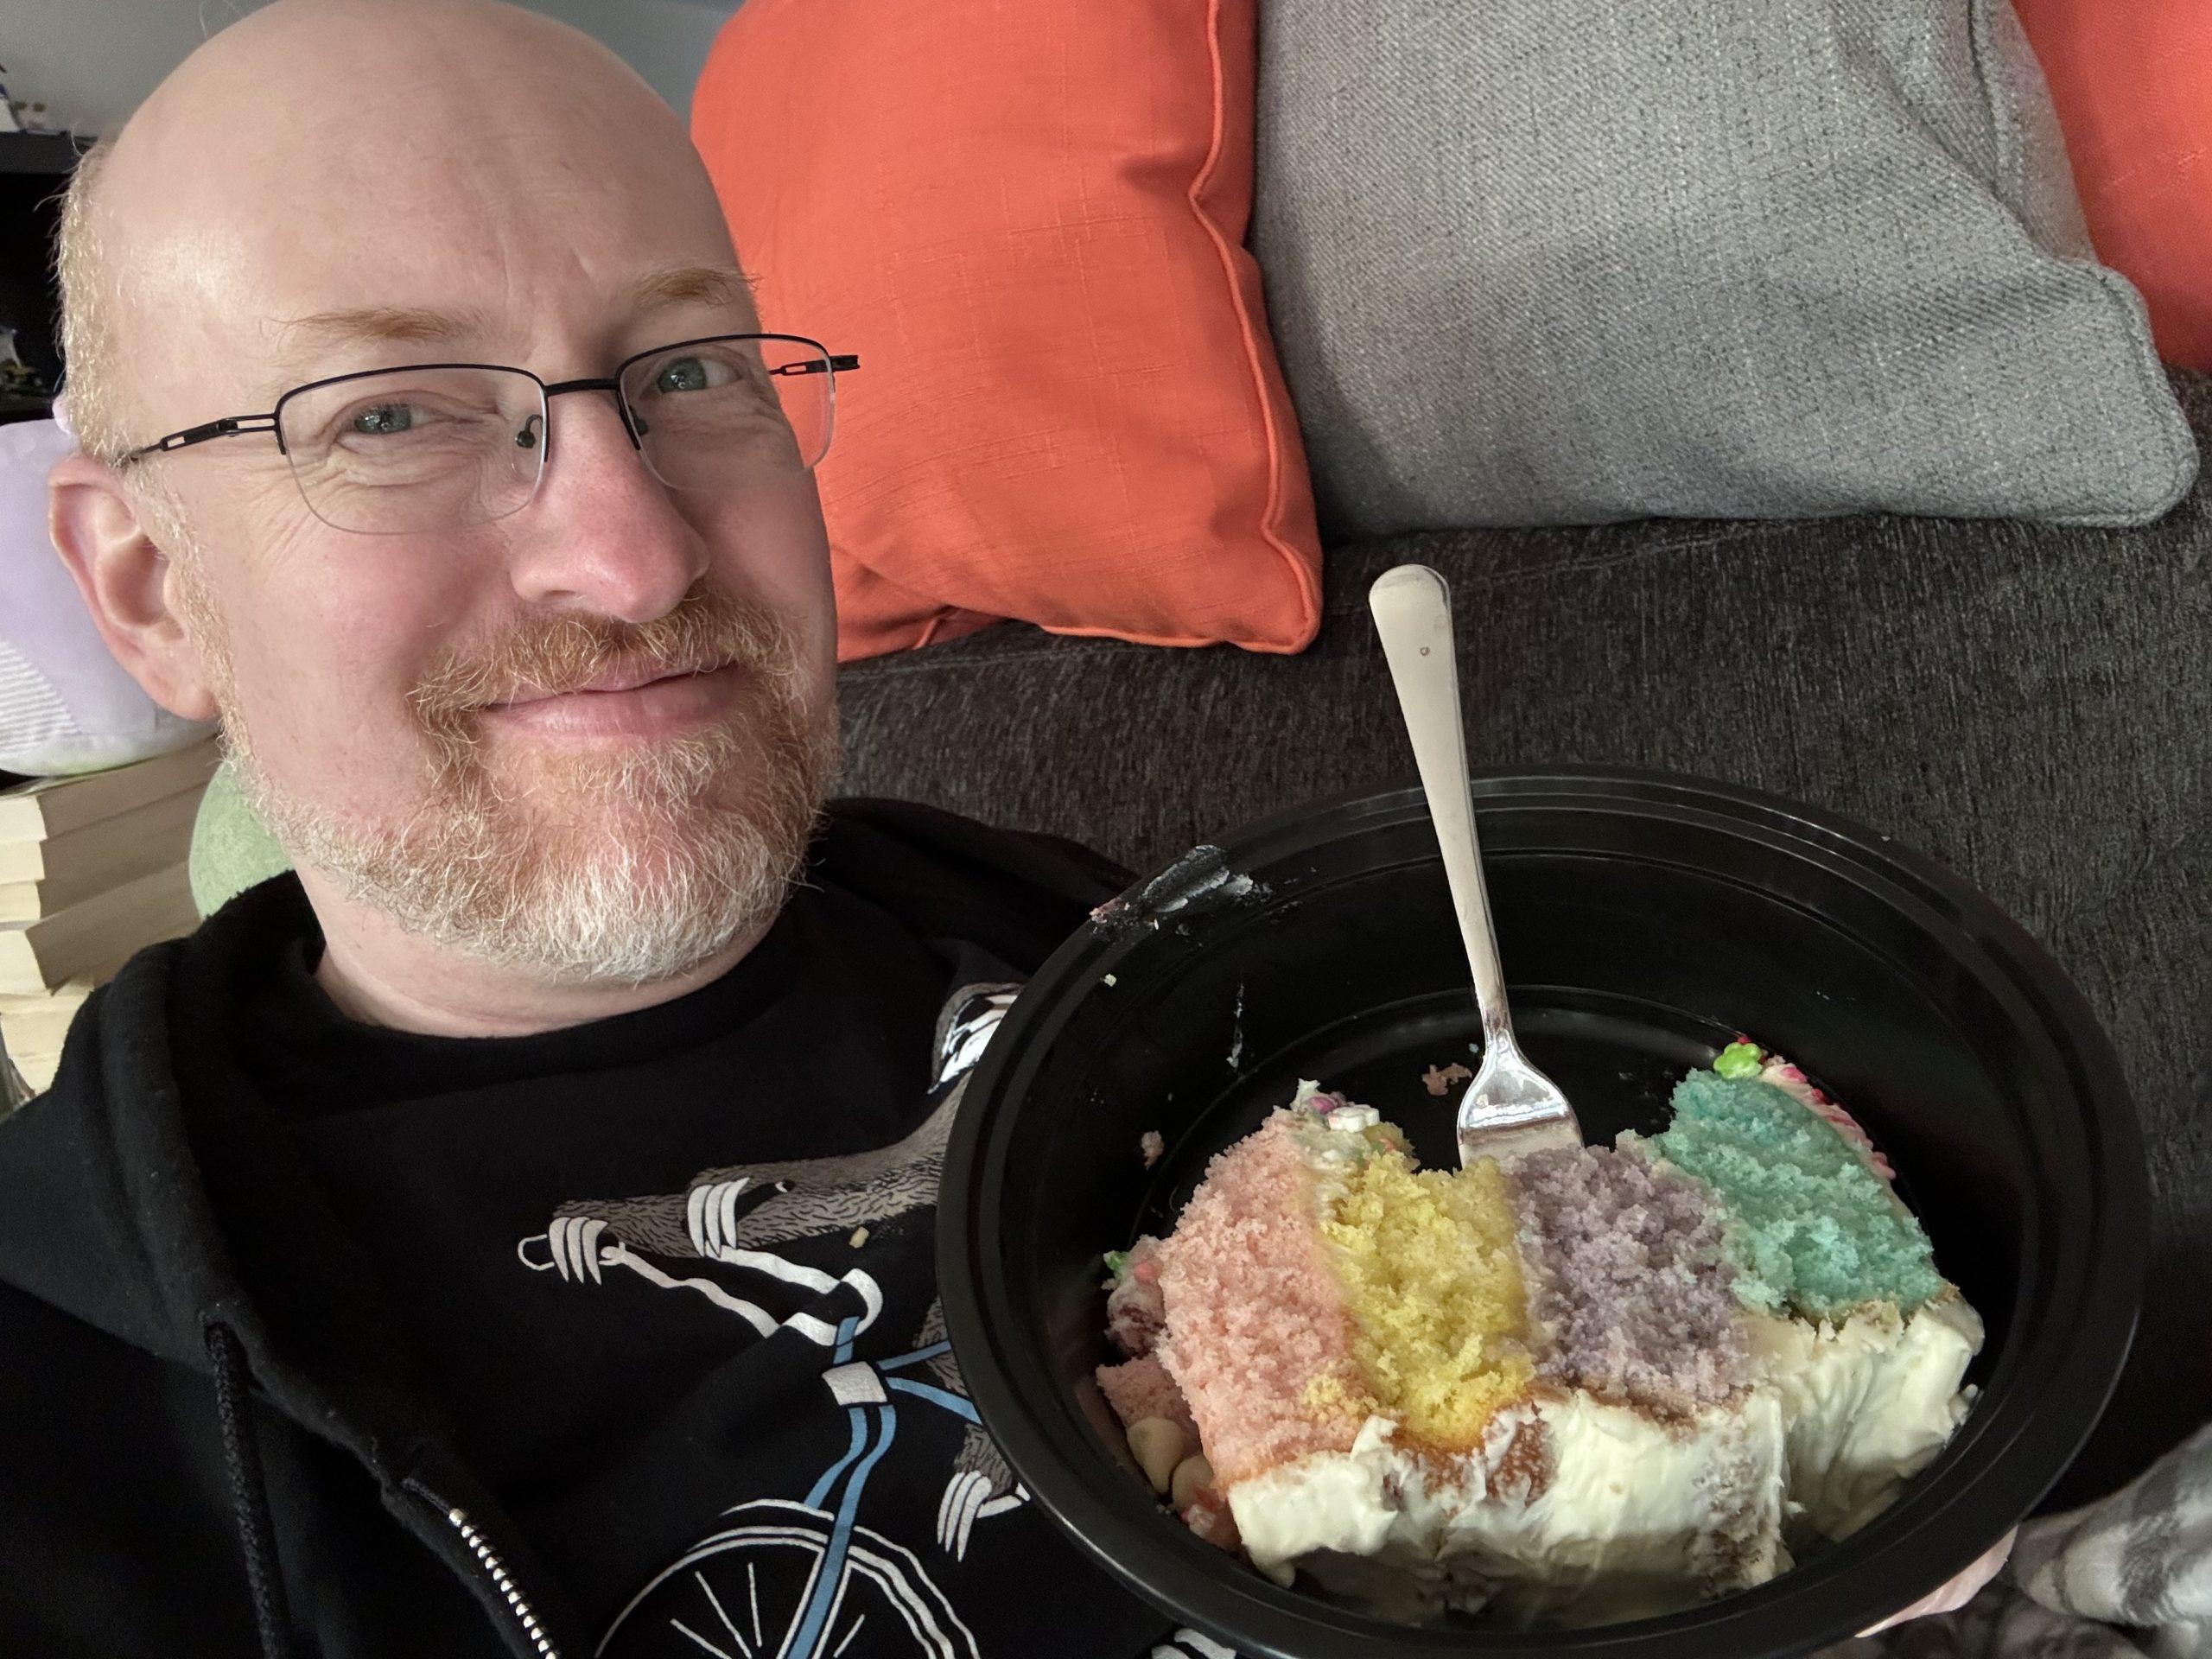 Me on our couch, holding a plate with a piece of cake with four layers, one pink, one yellow, one purple, and one green.